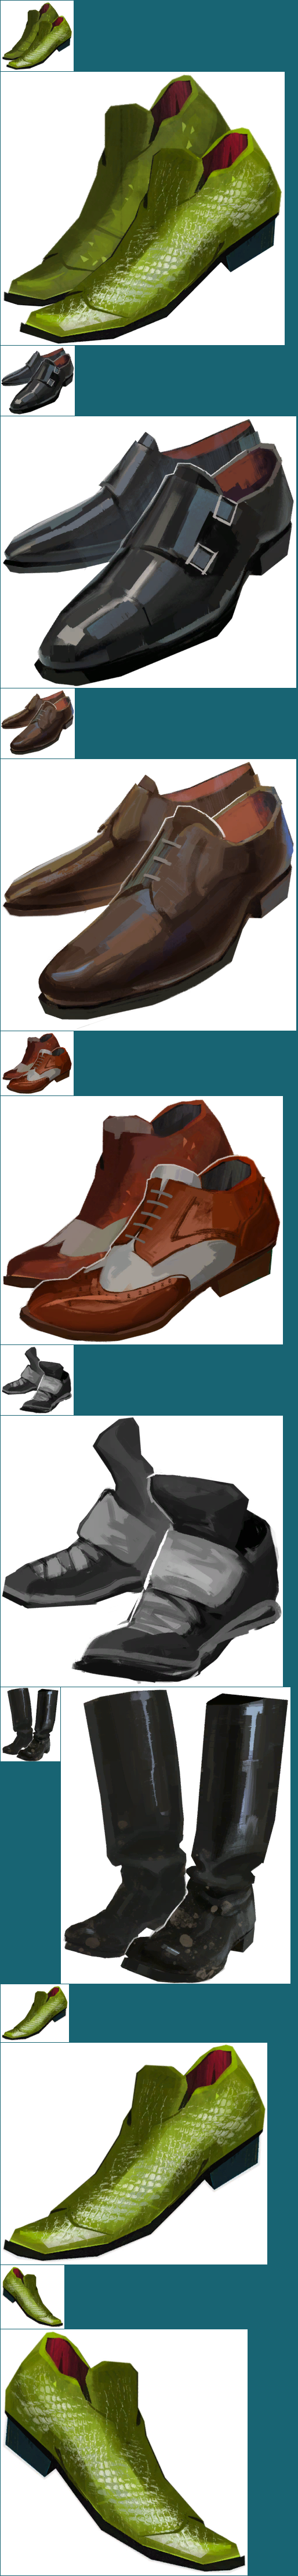 Clothing (Shoes)